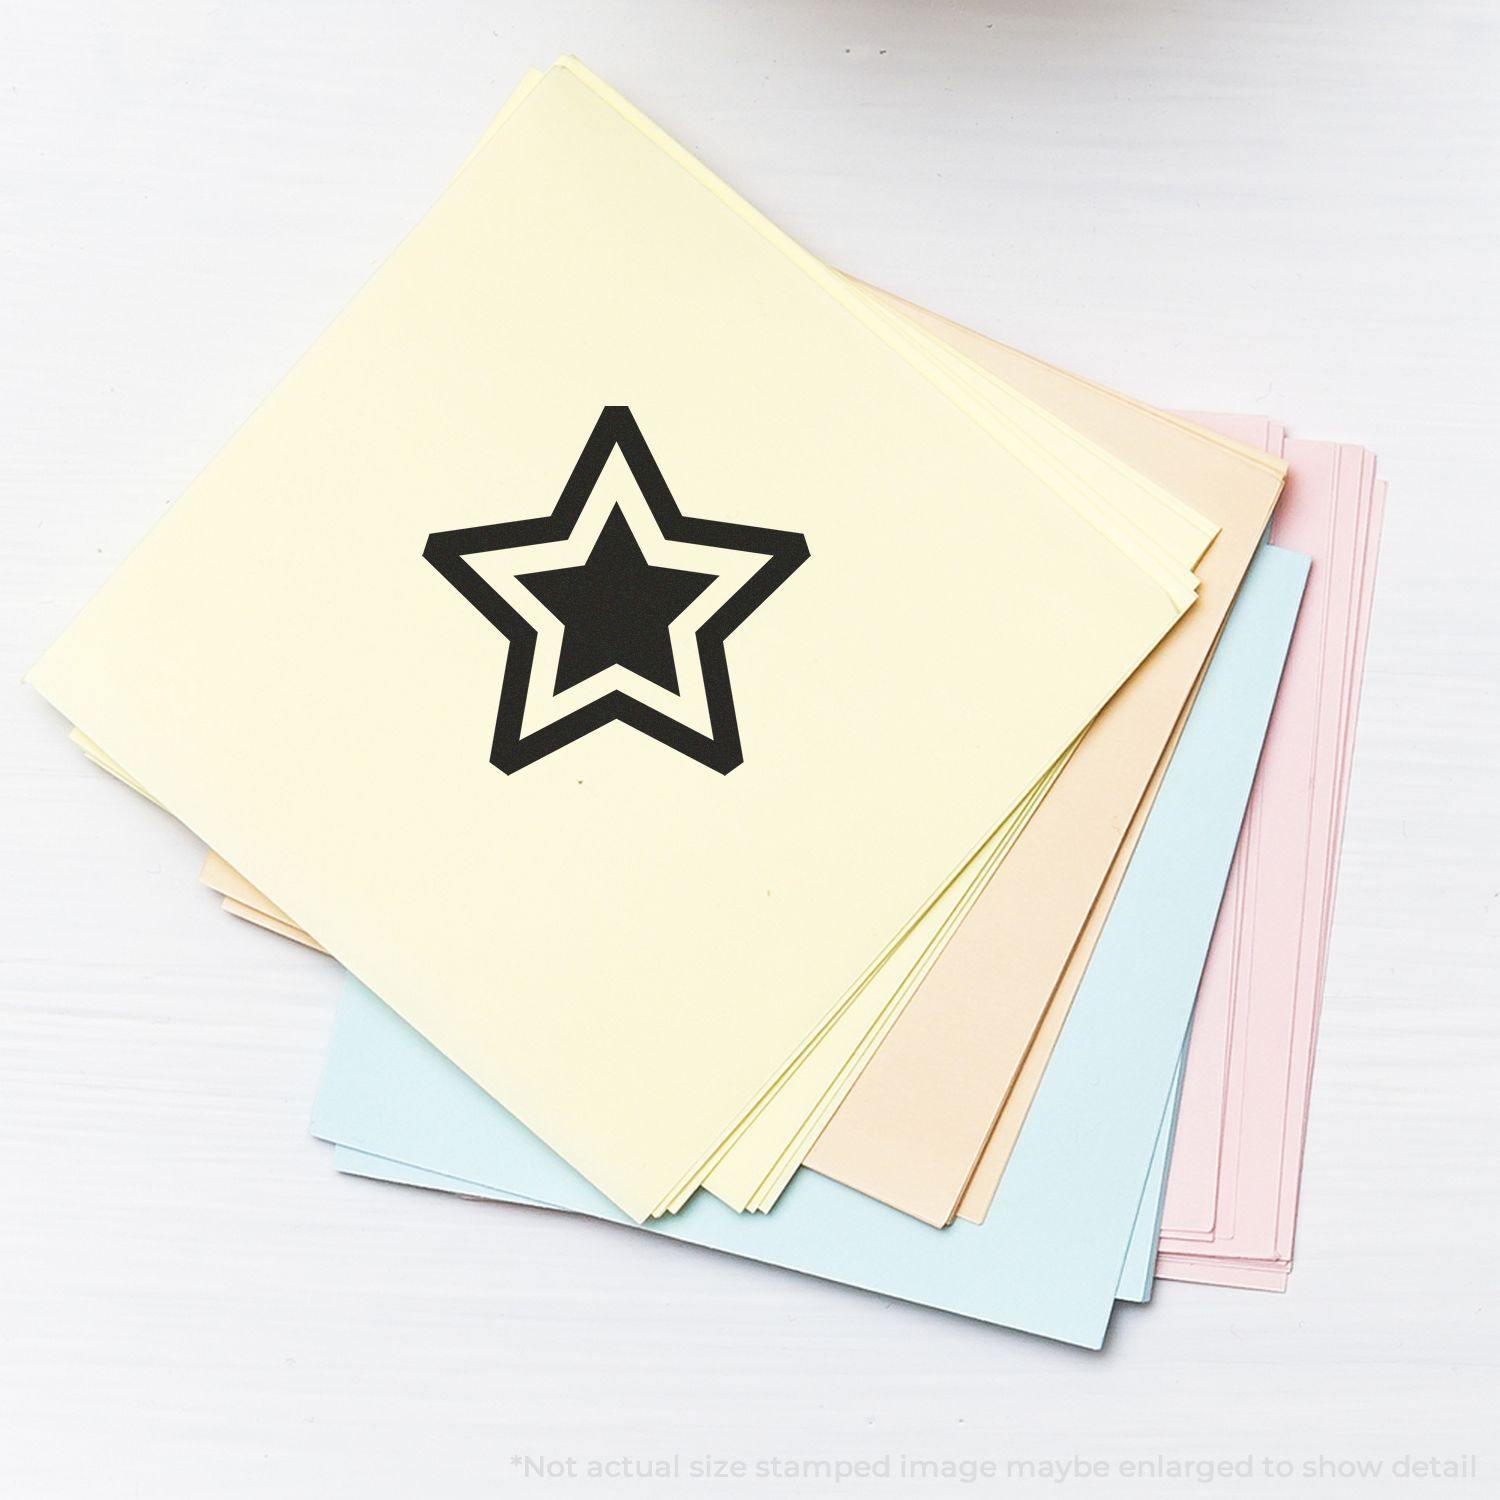 Rubber Stamp Rating With Stars 